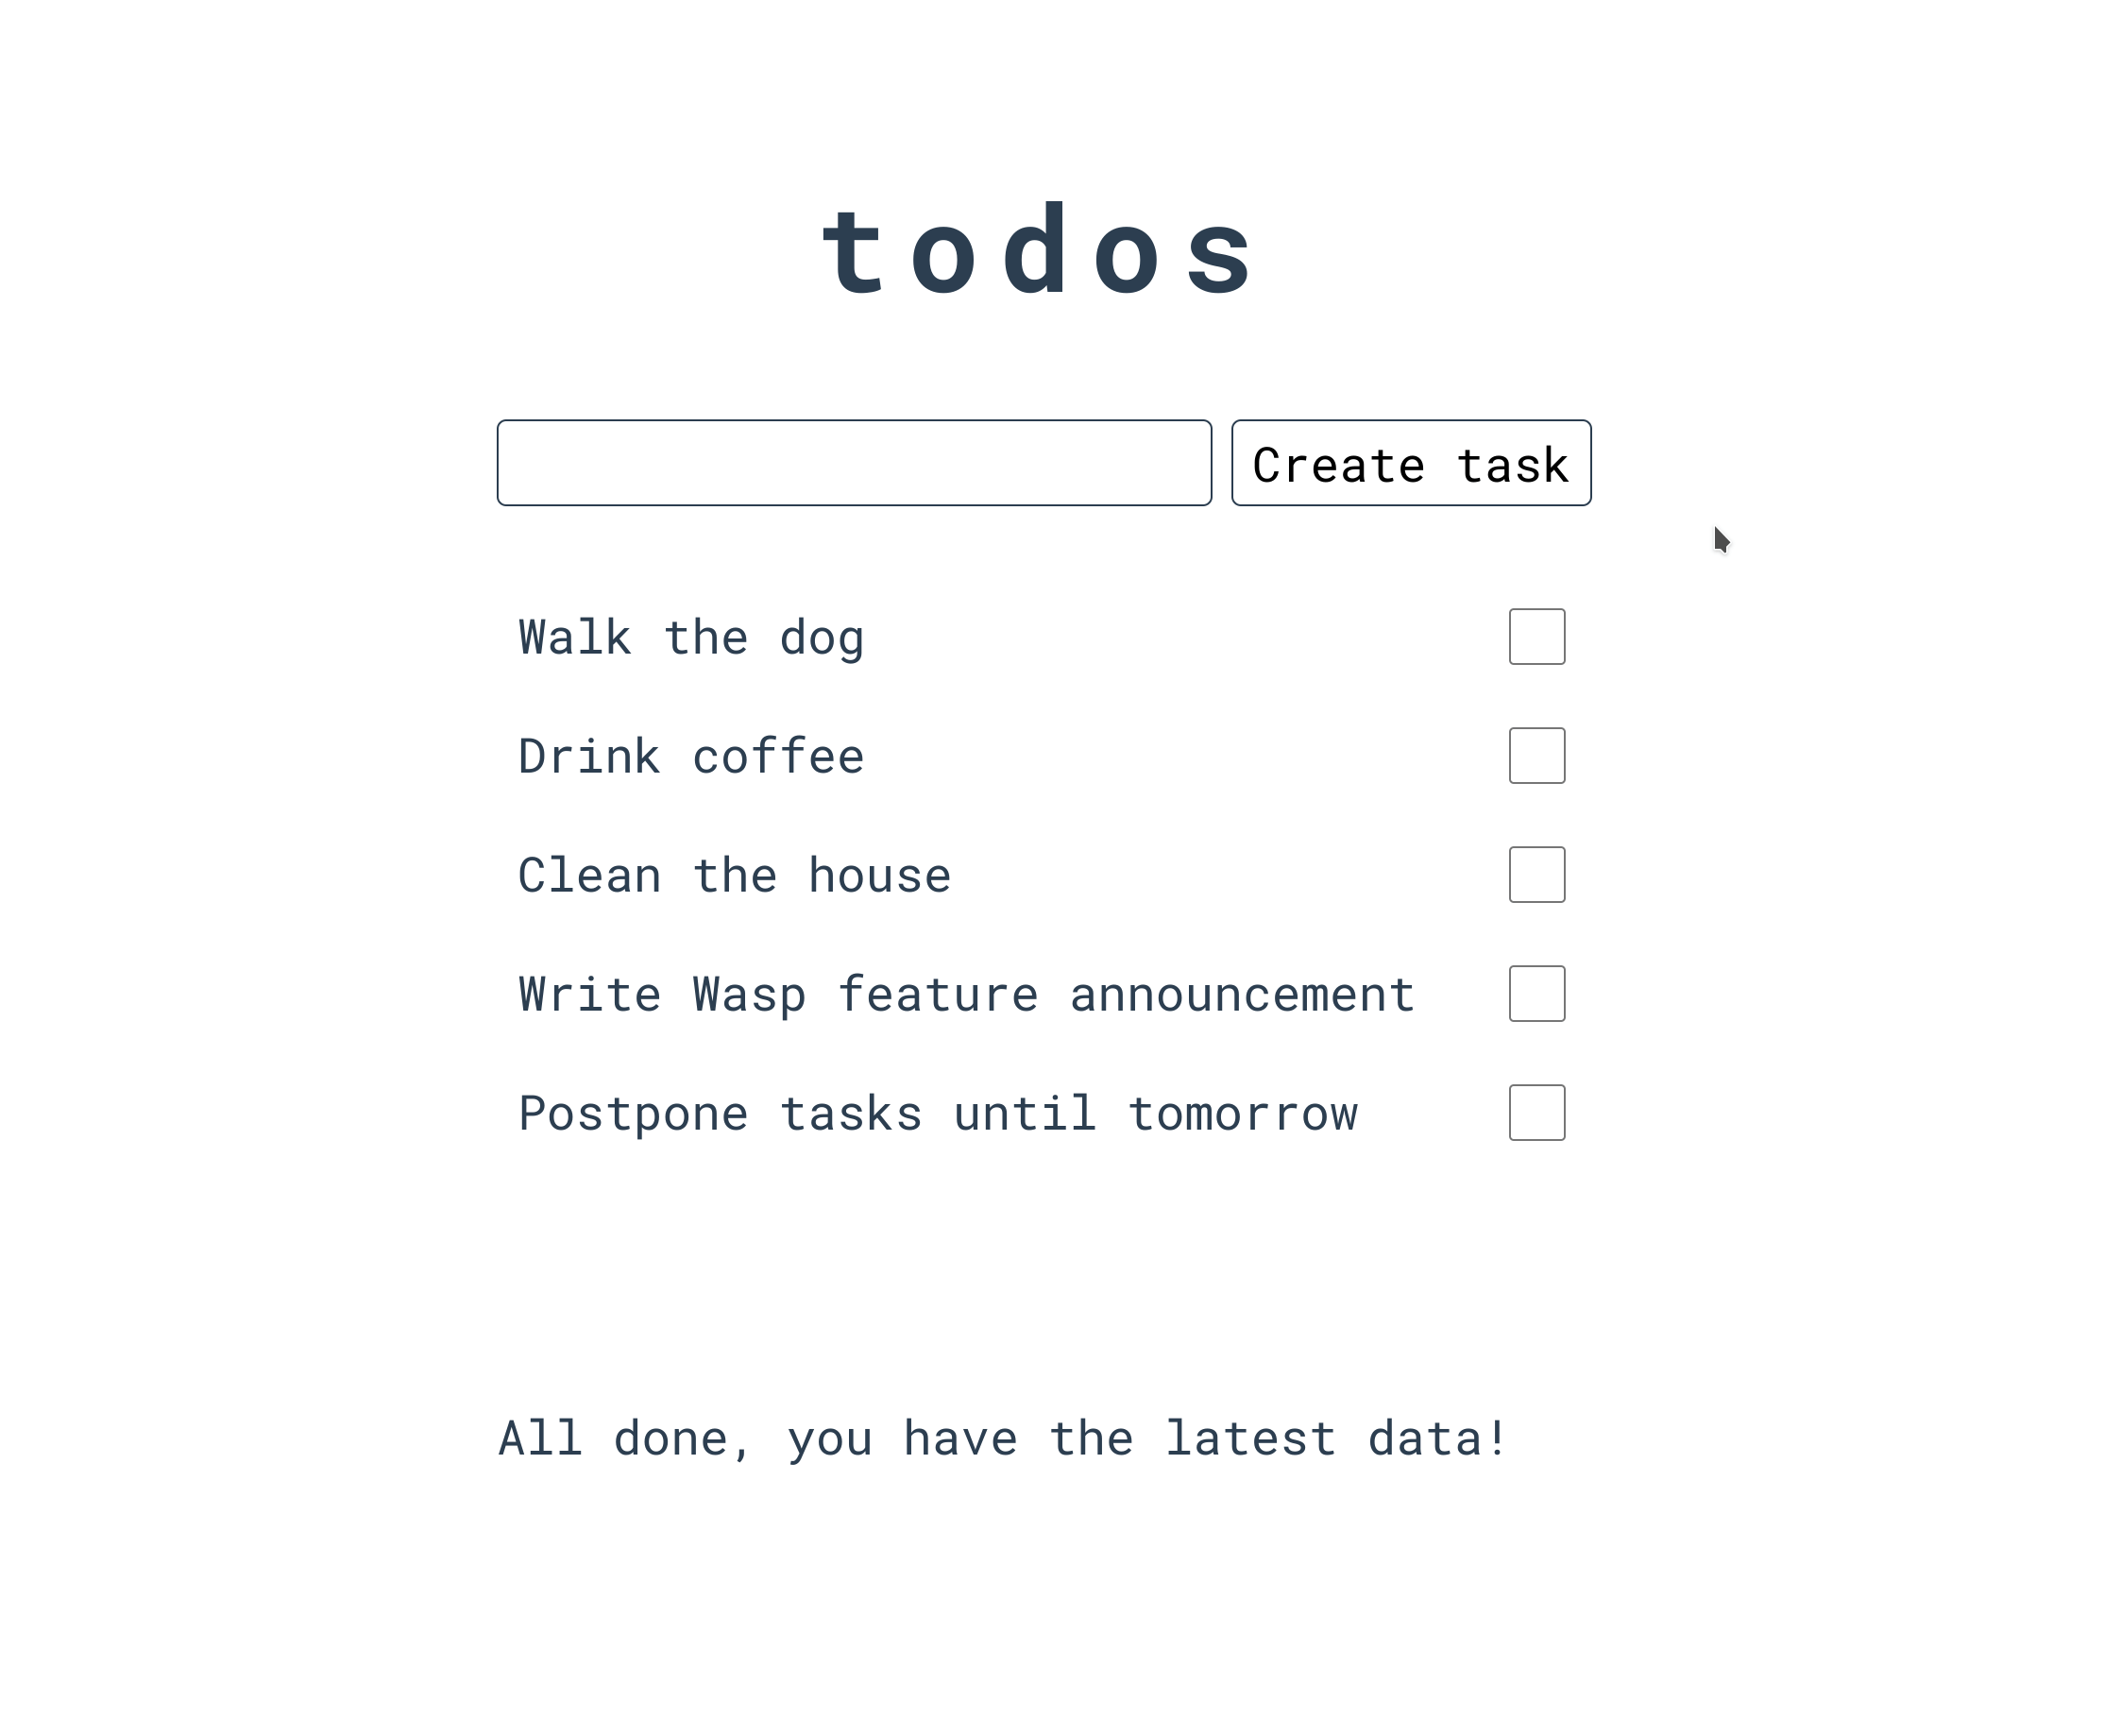 Optimistically updated todo list